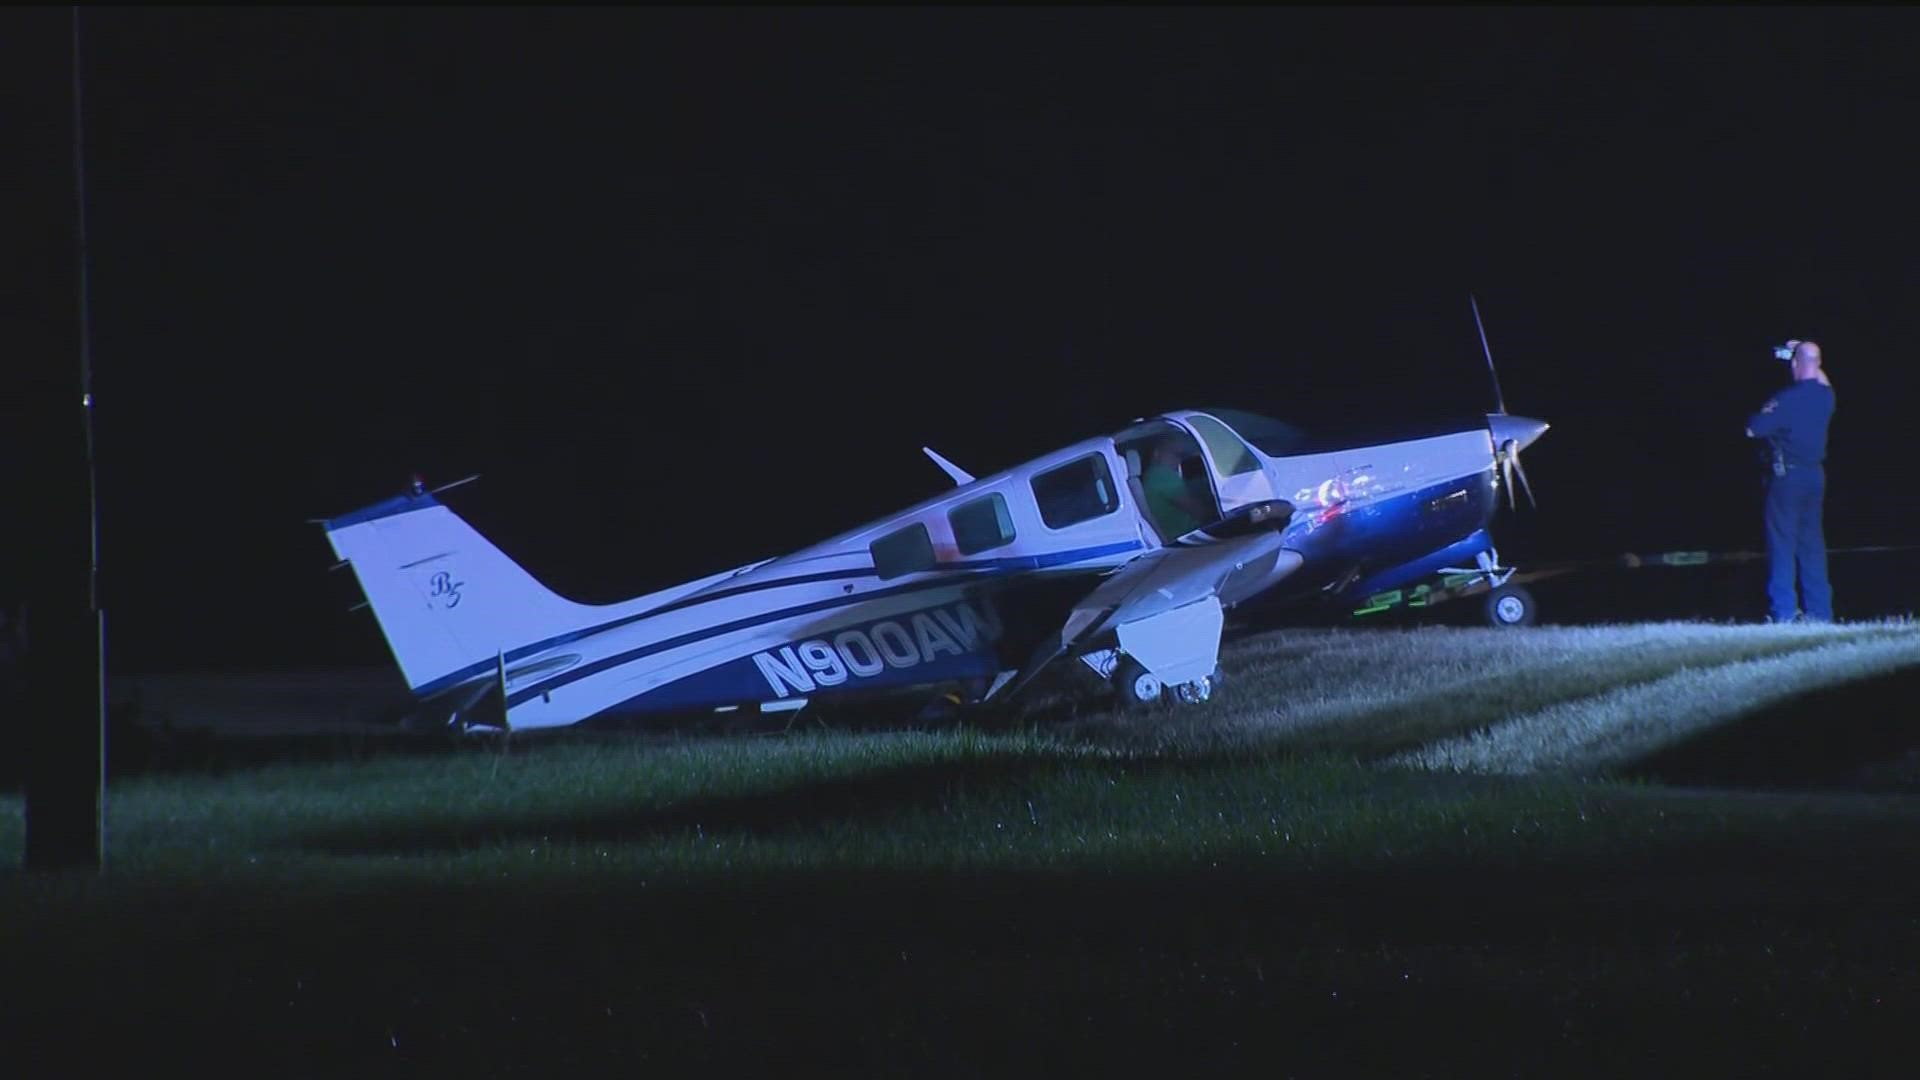 Two people are safe after an airplane made an emergency landing on a Covington highway Thursday evening, a spokesperson with the Federal Aviation Administration said